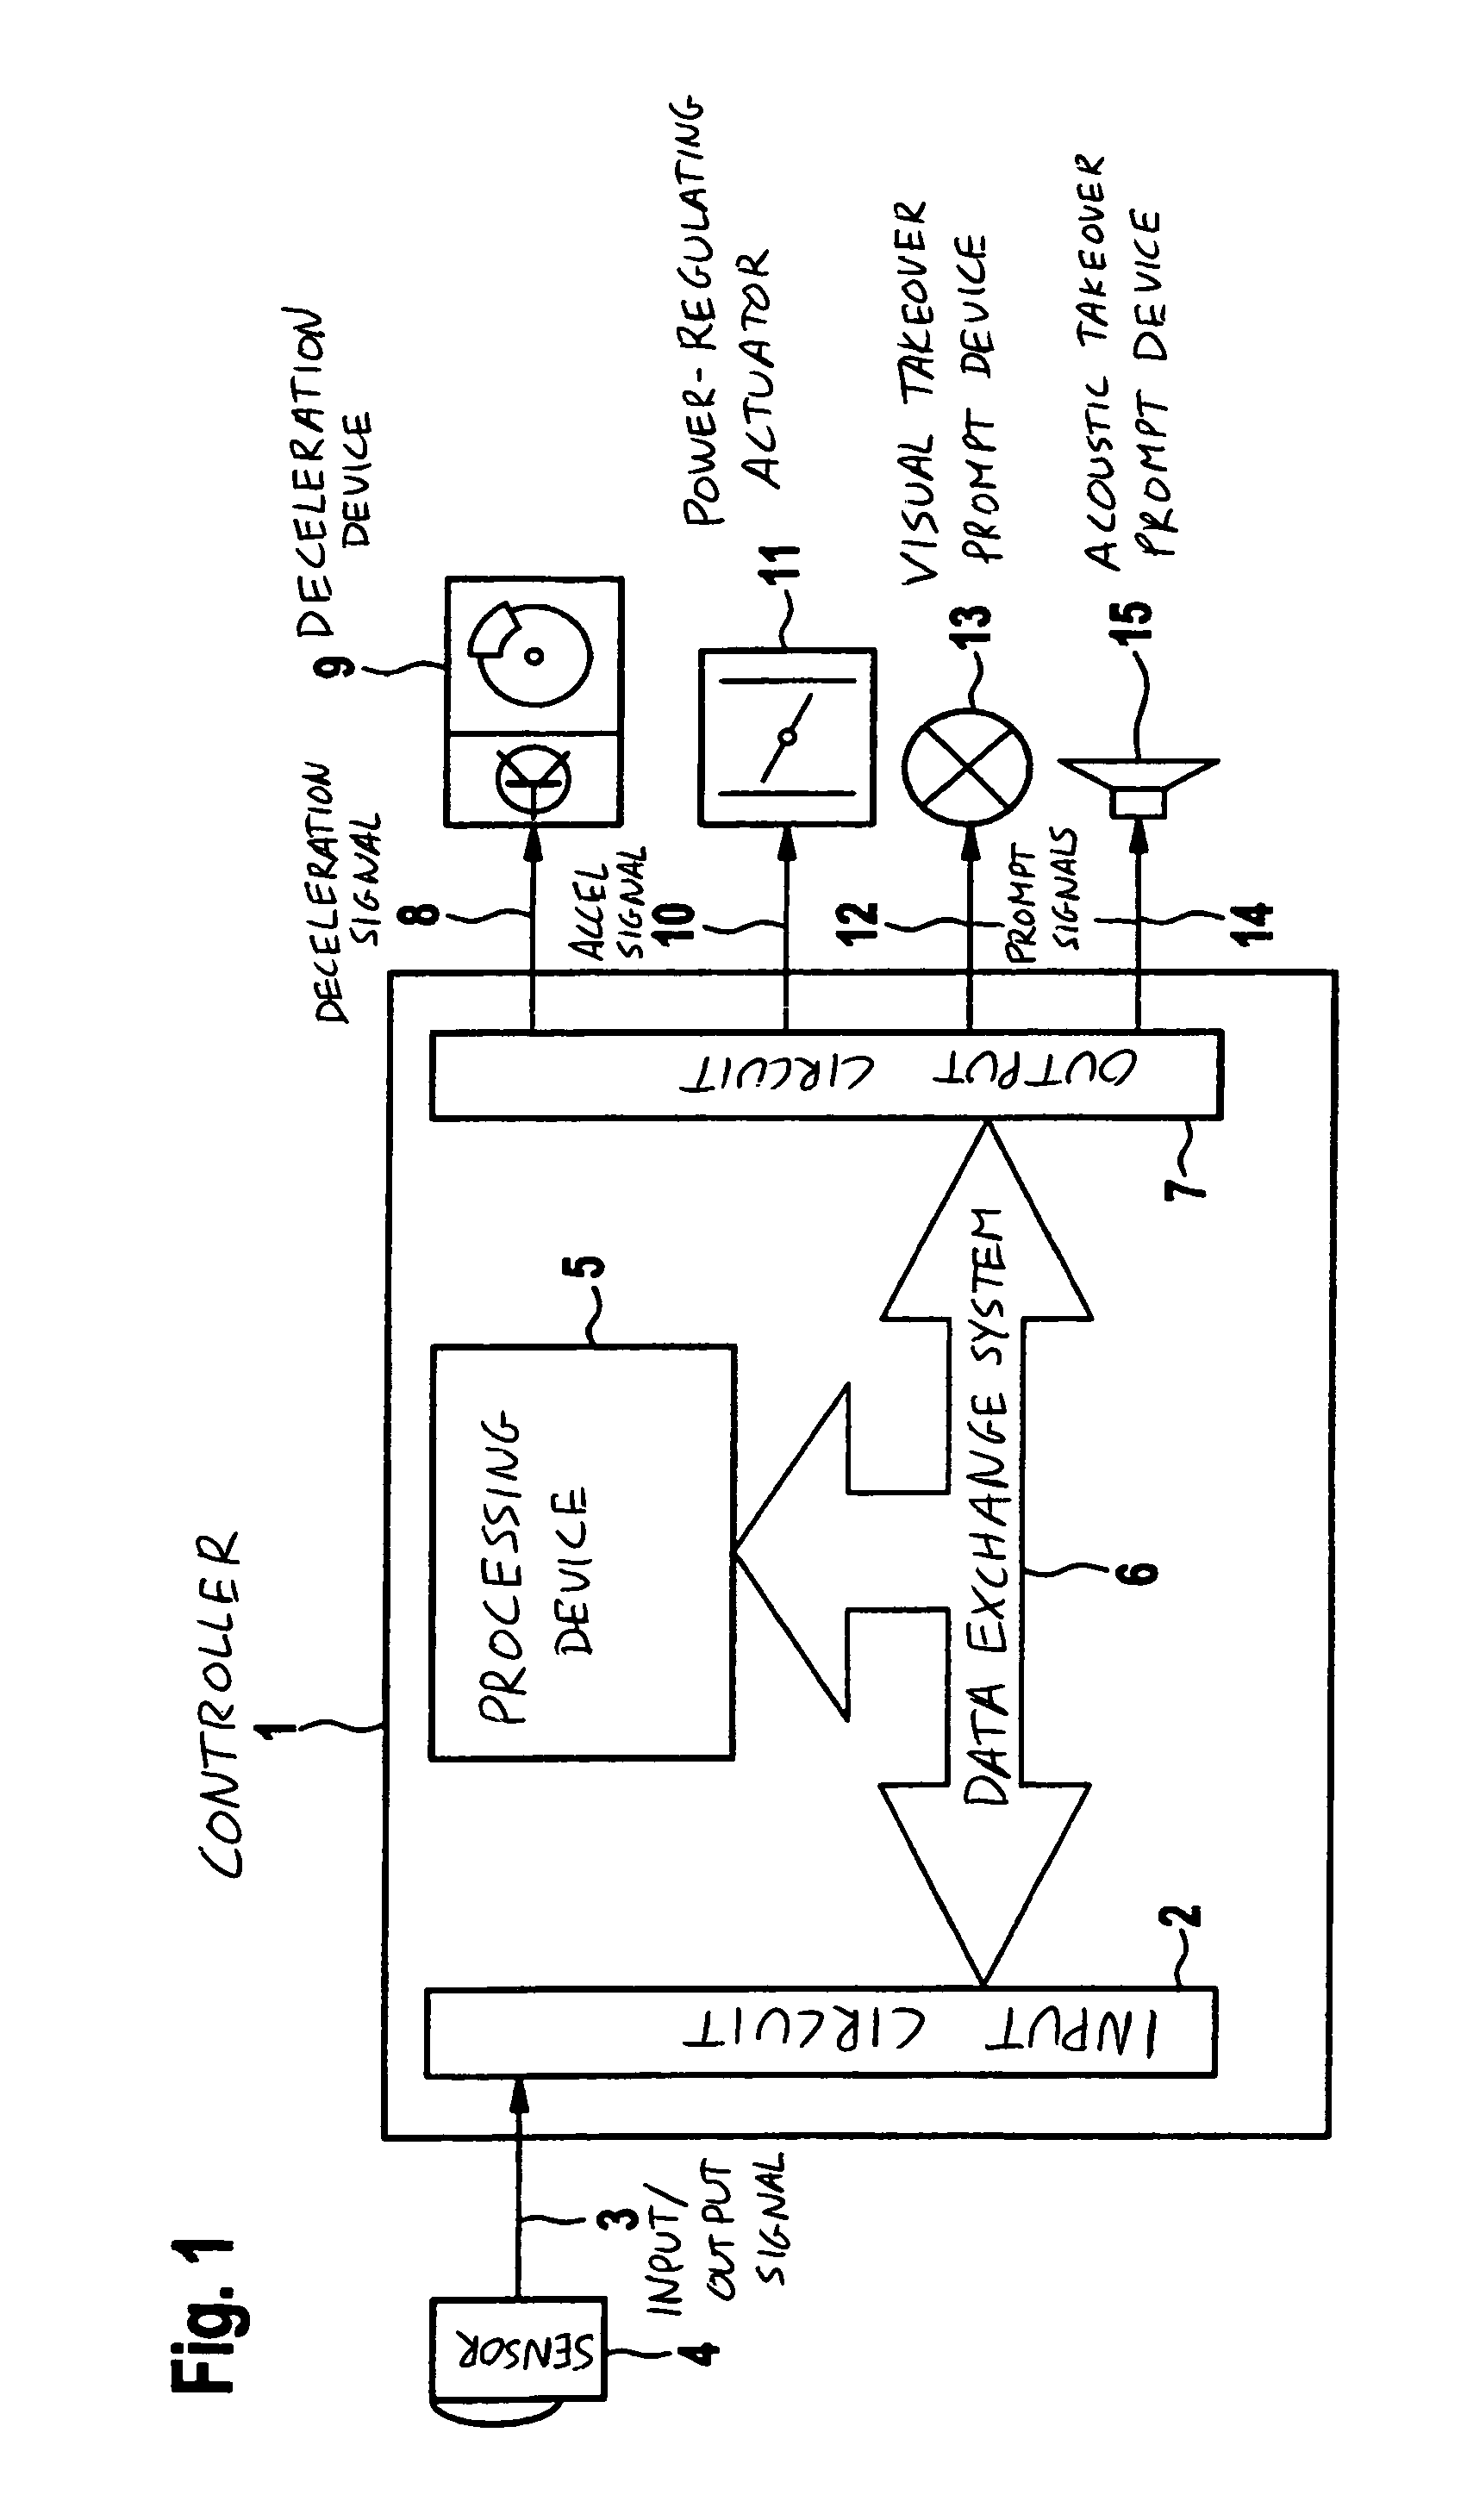 Method and device for notifying the driver of a motor vehicle